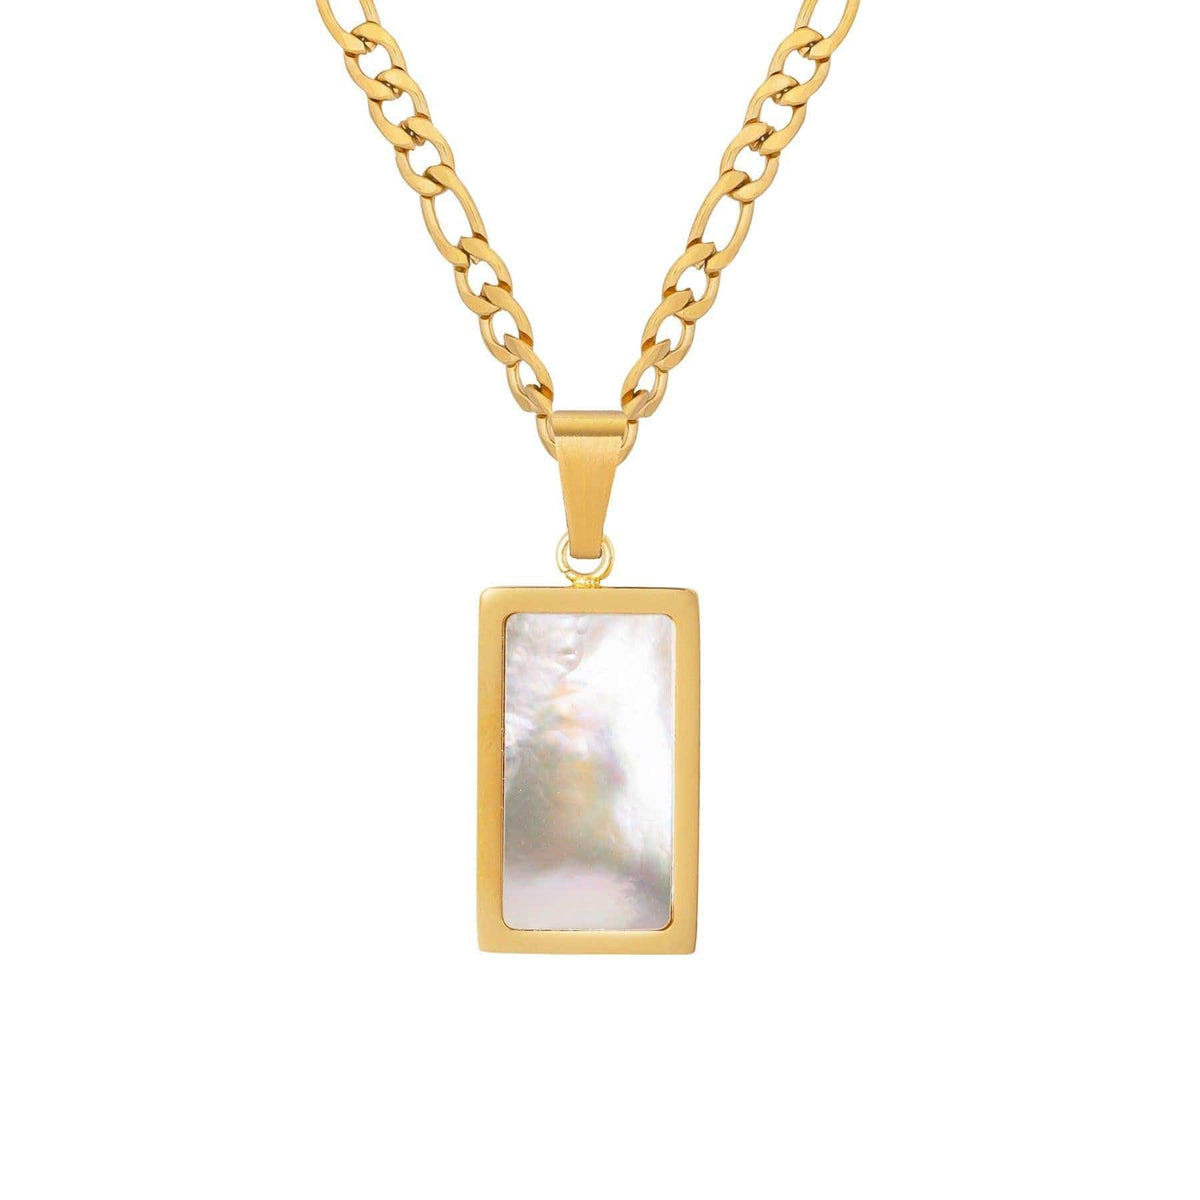 BohoMoon Stainless Steel Ines Necklace Gold